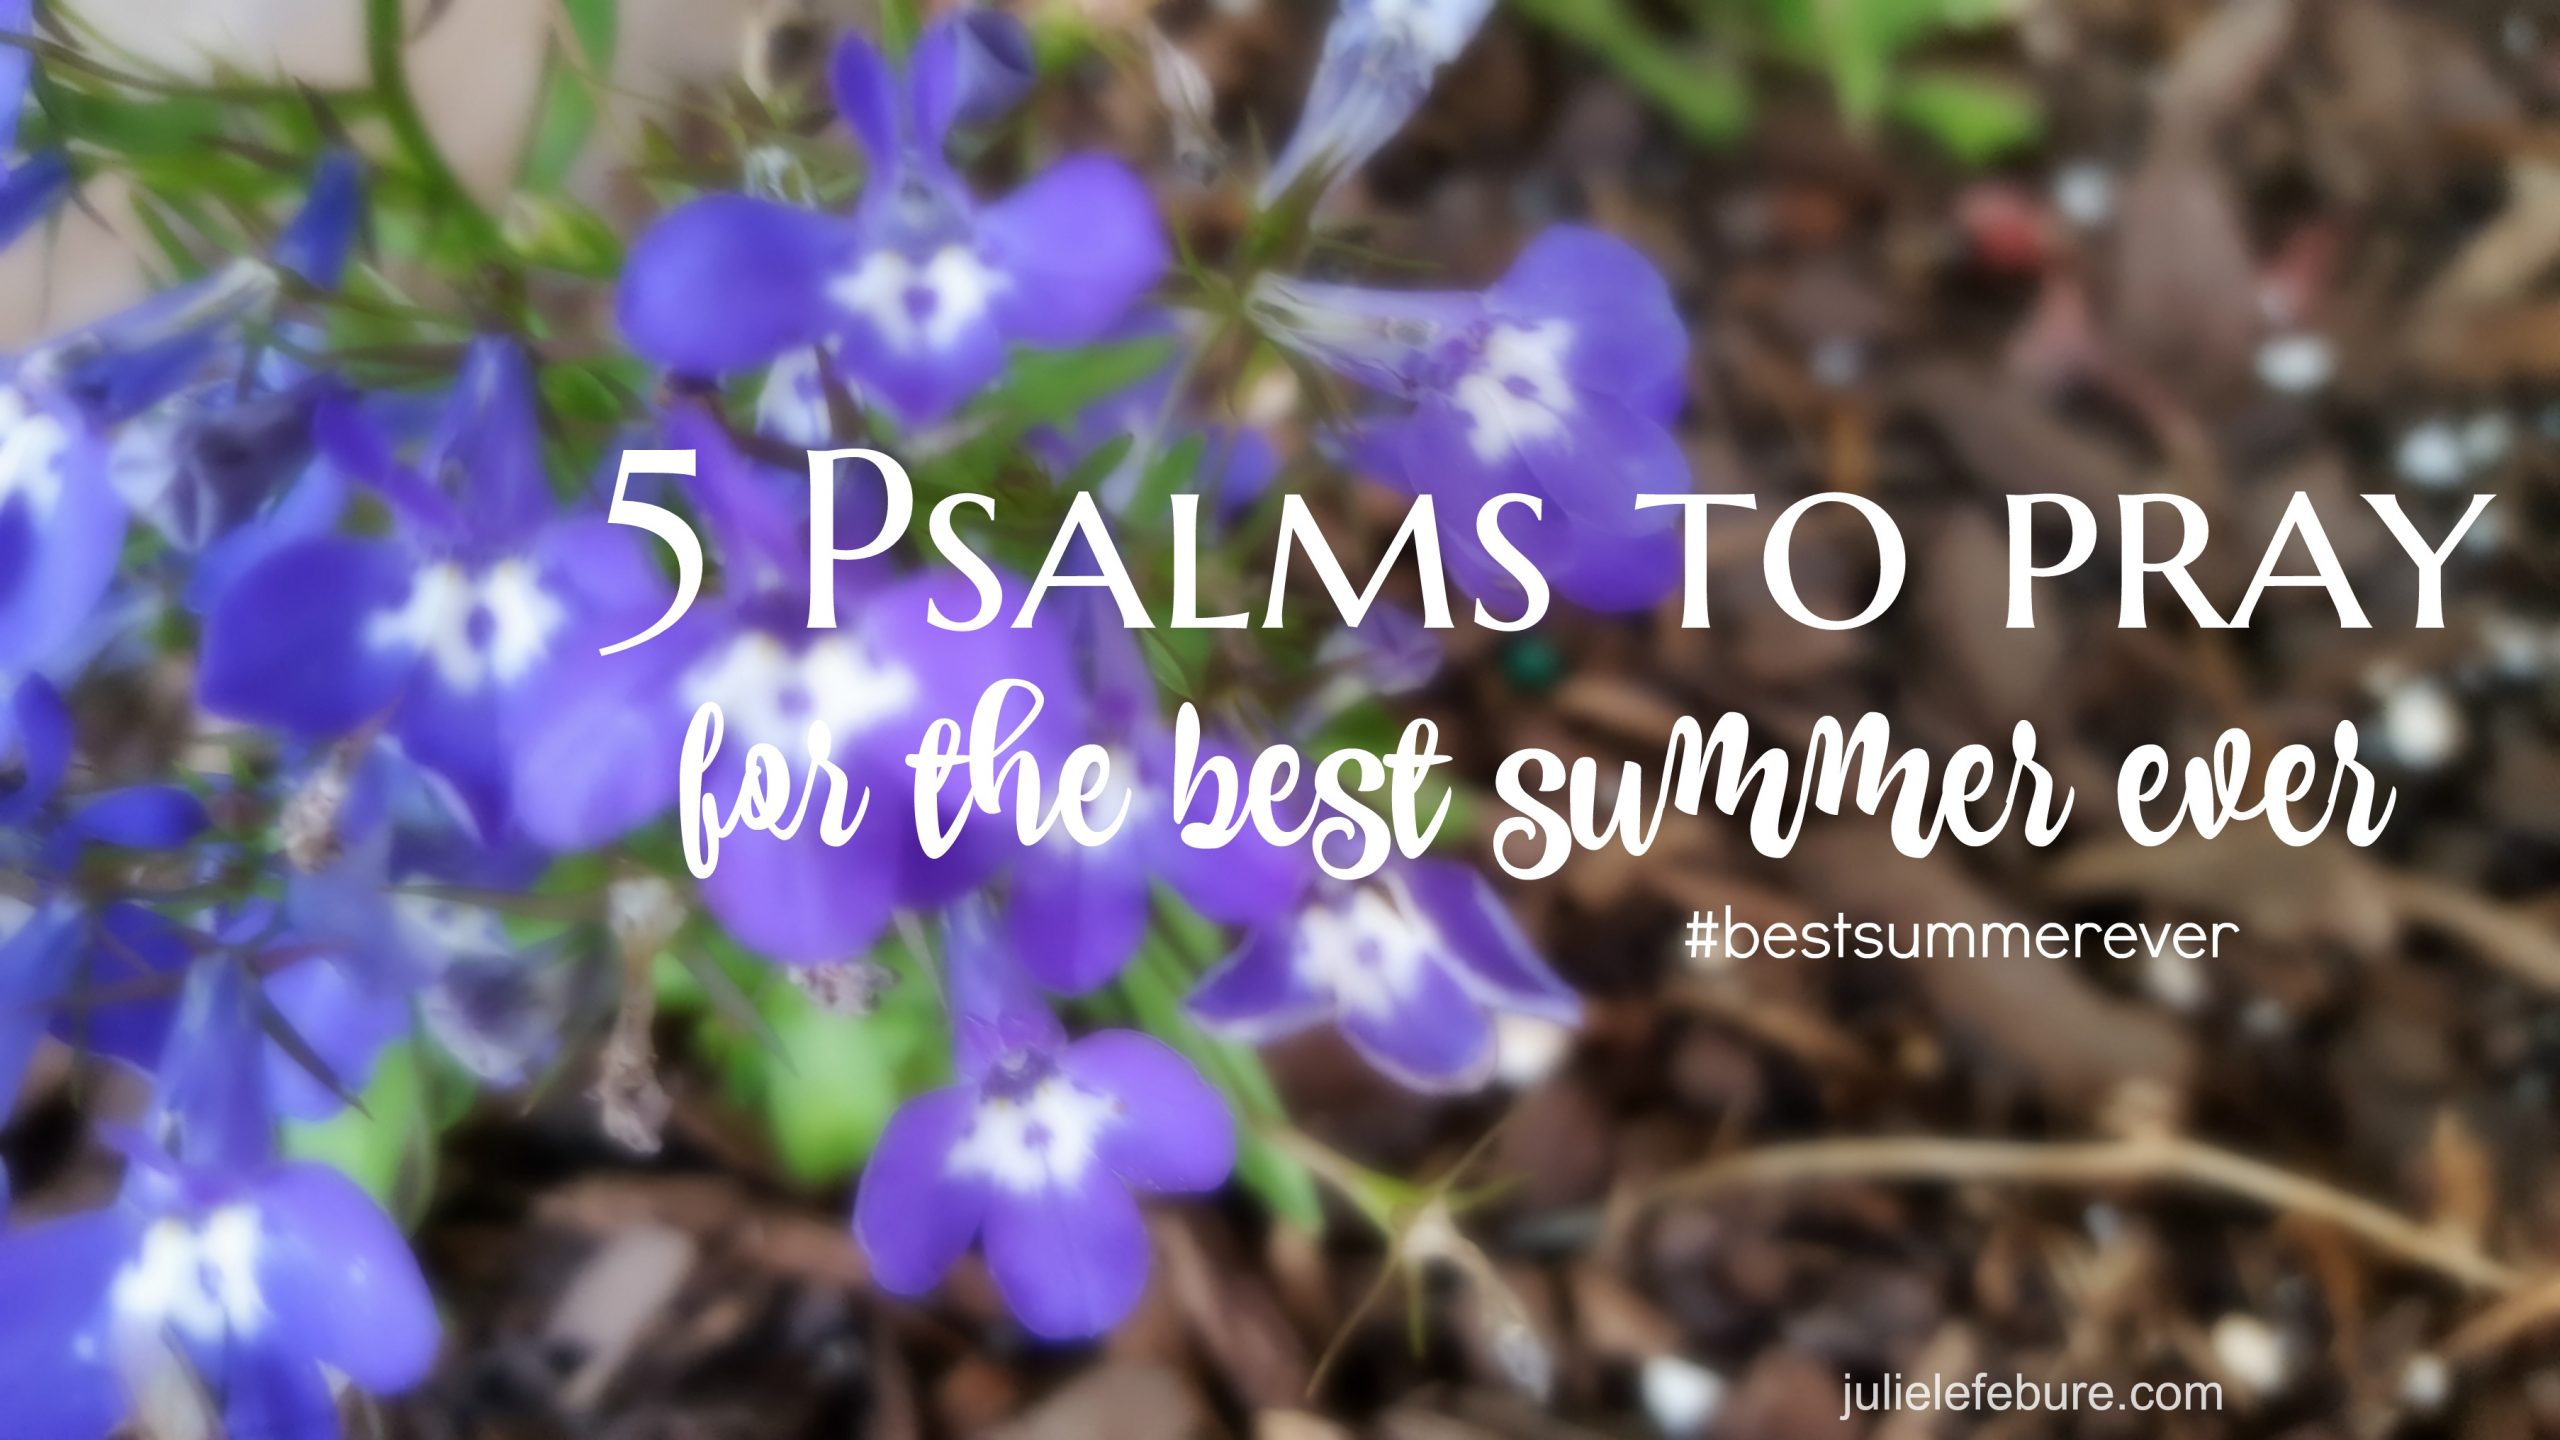 5 Psalms To Pray For The Best Summer Ever